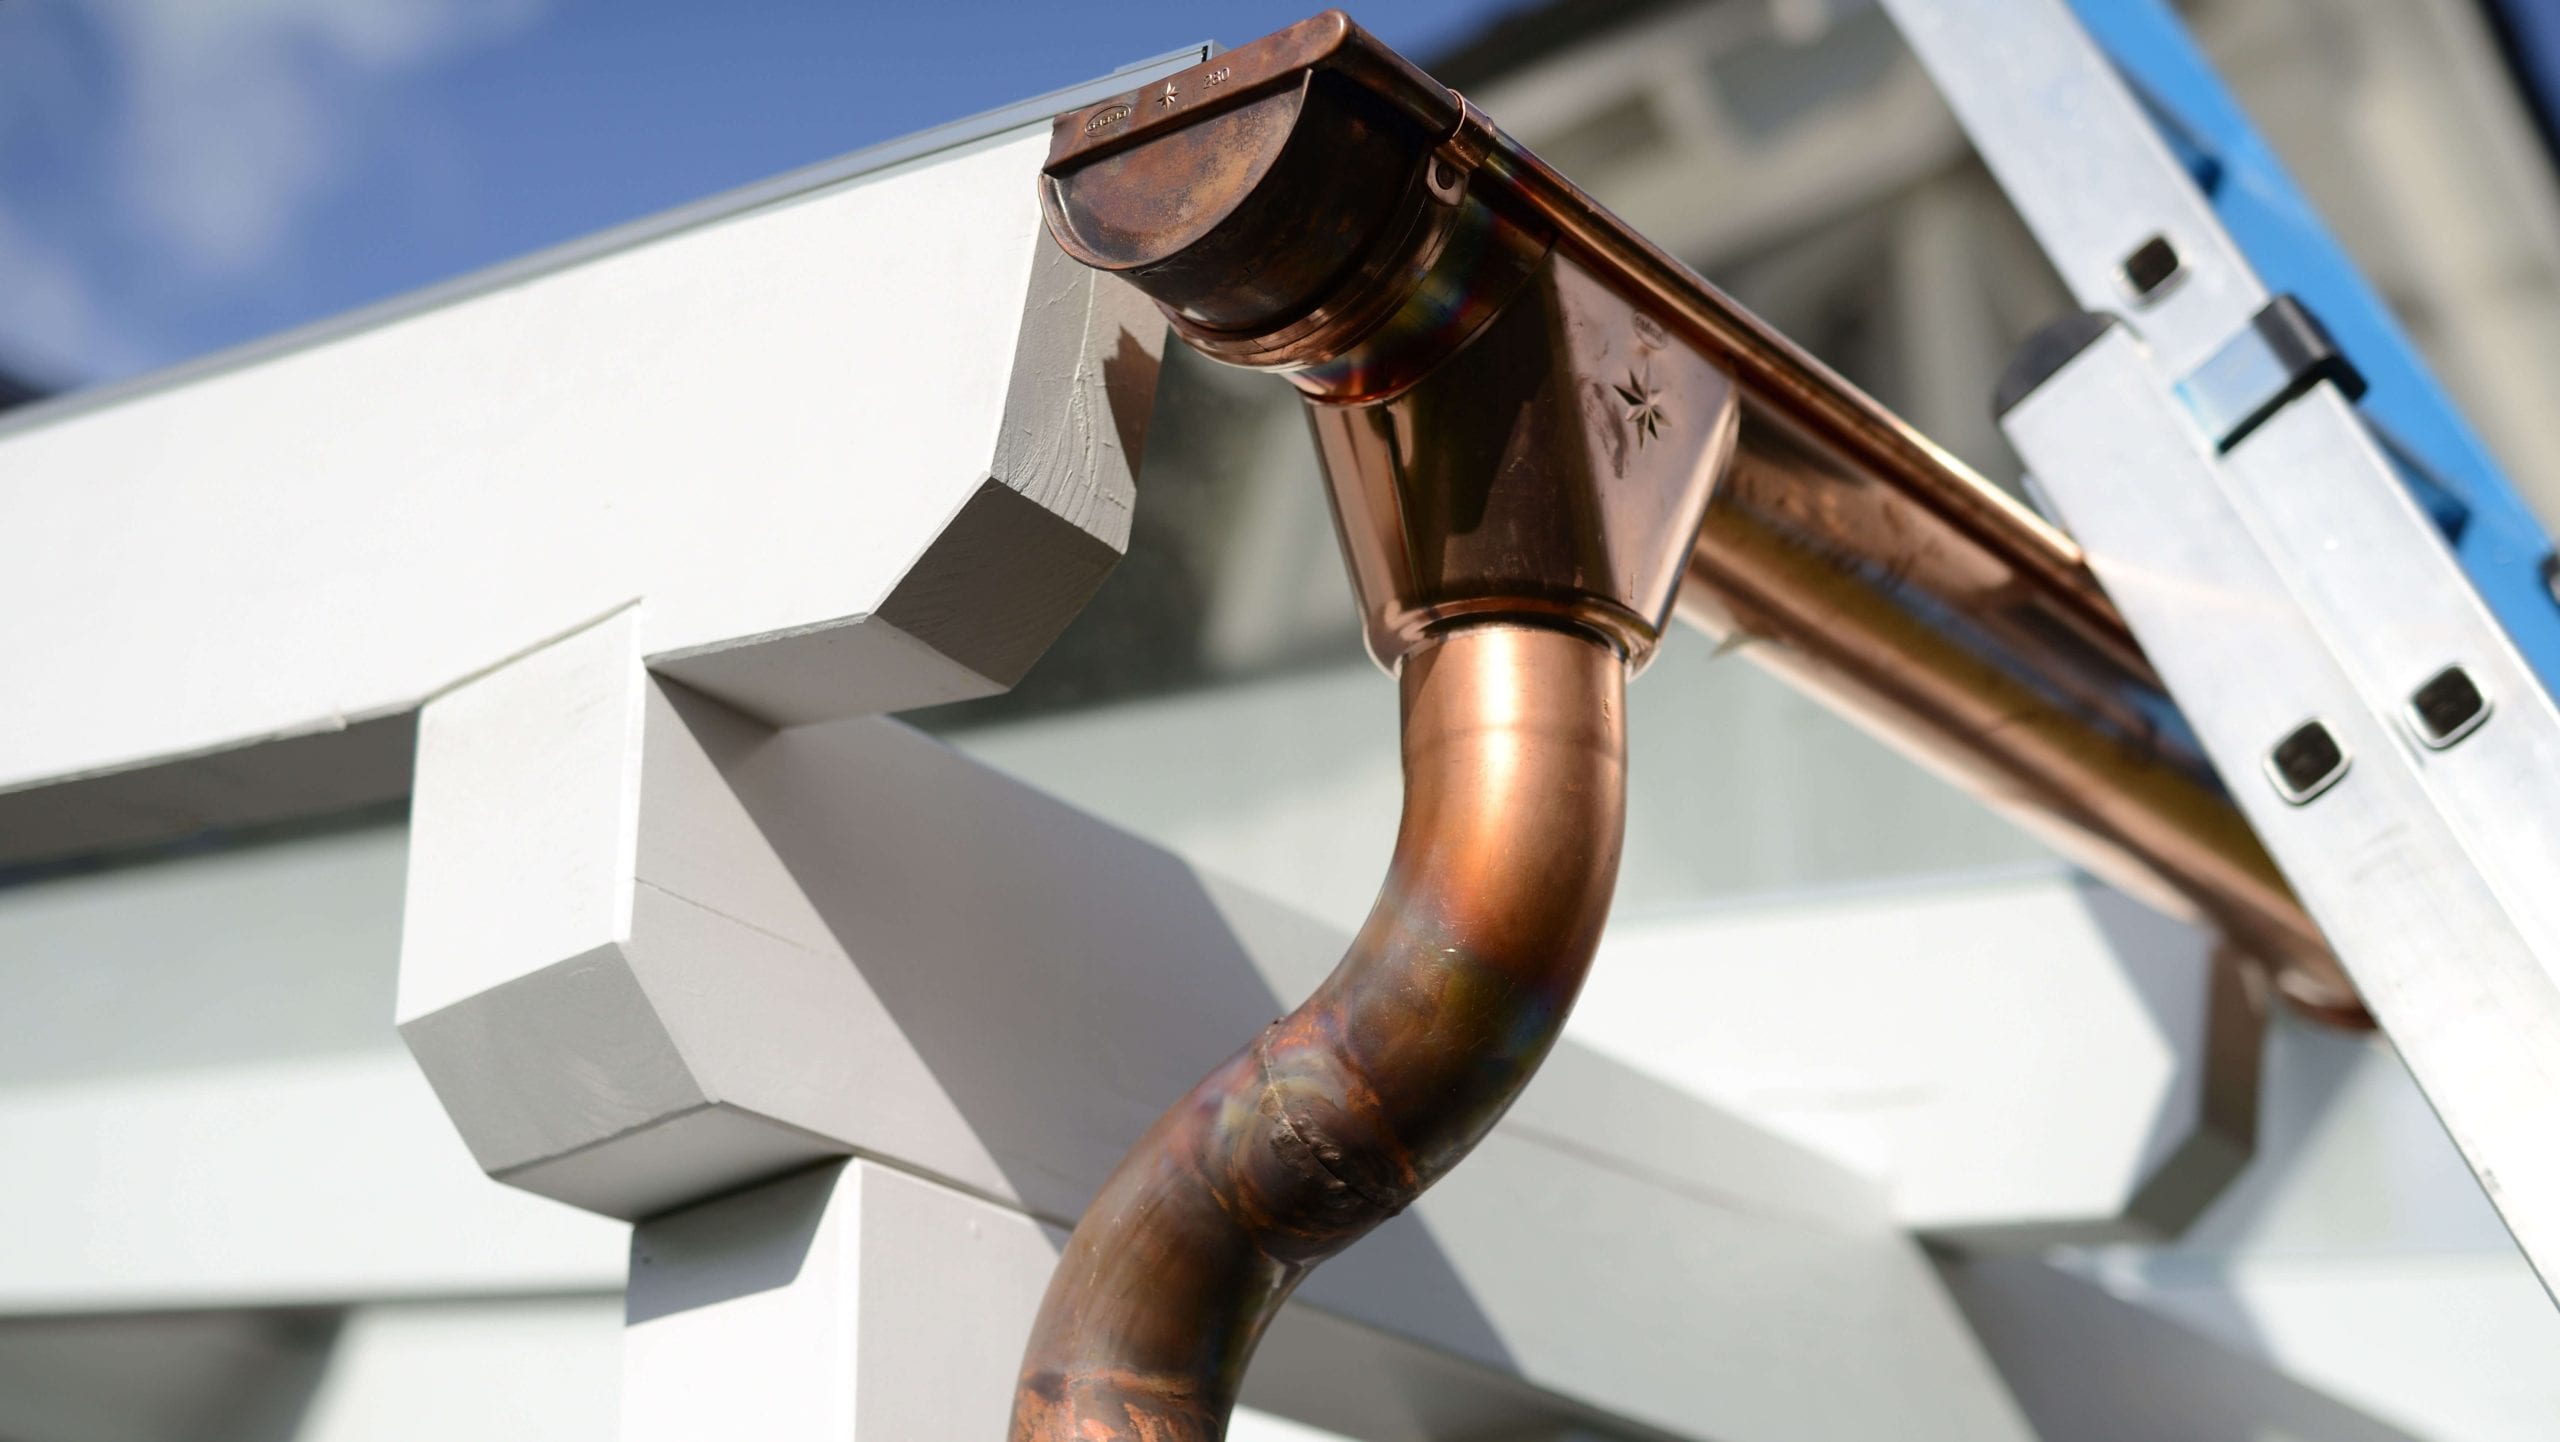 Make your property stand out with copper gutters. Contact for gutter installation in Asheville